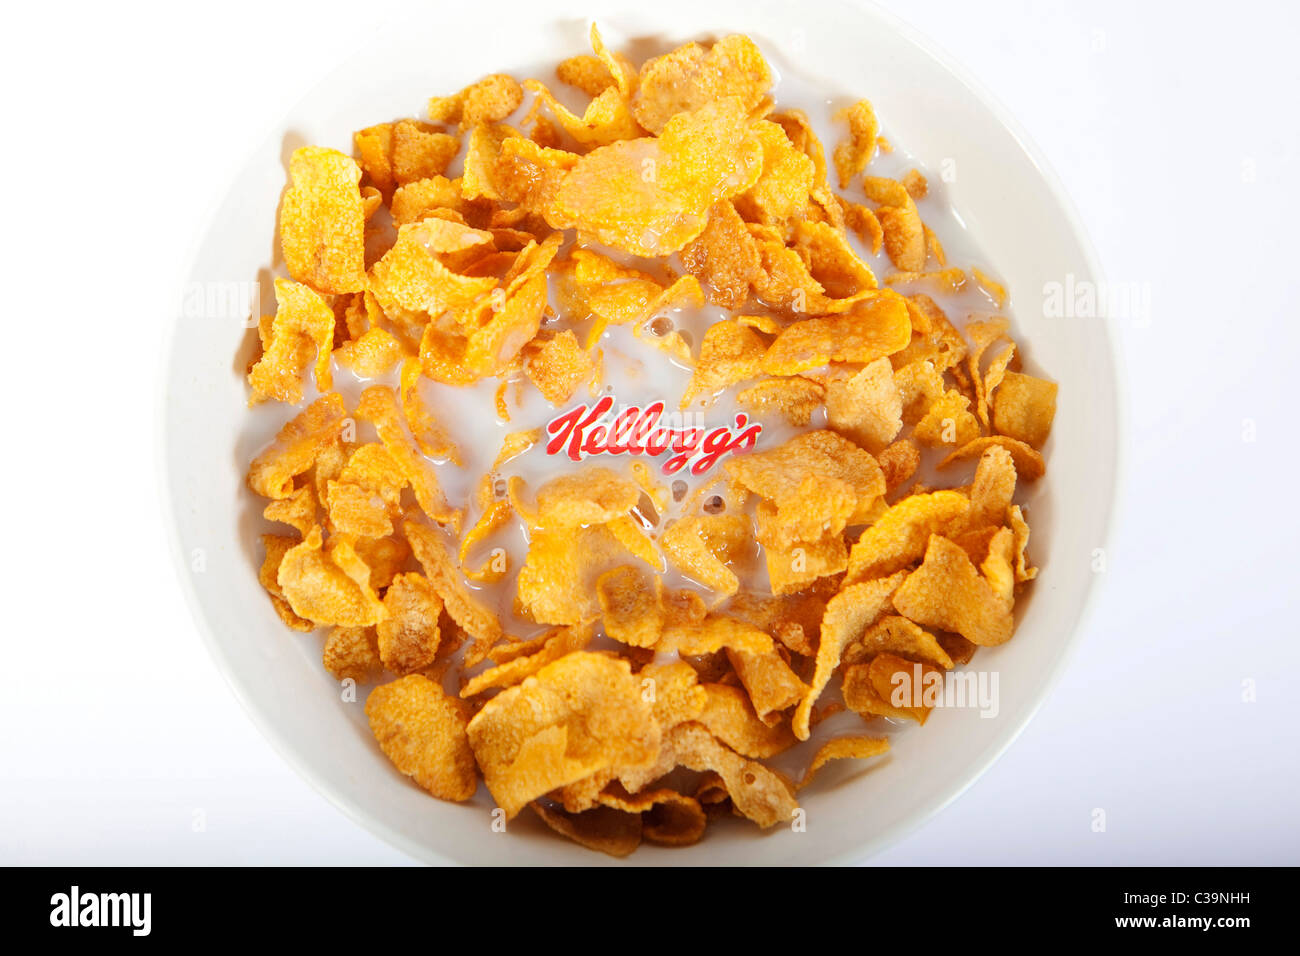 Illustrative image of the Kellogg's logo and famous branded corn flakes. Stock Photo